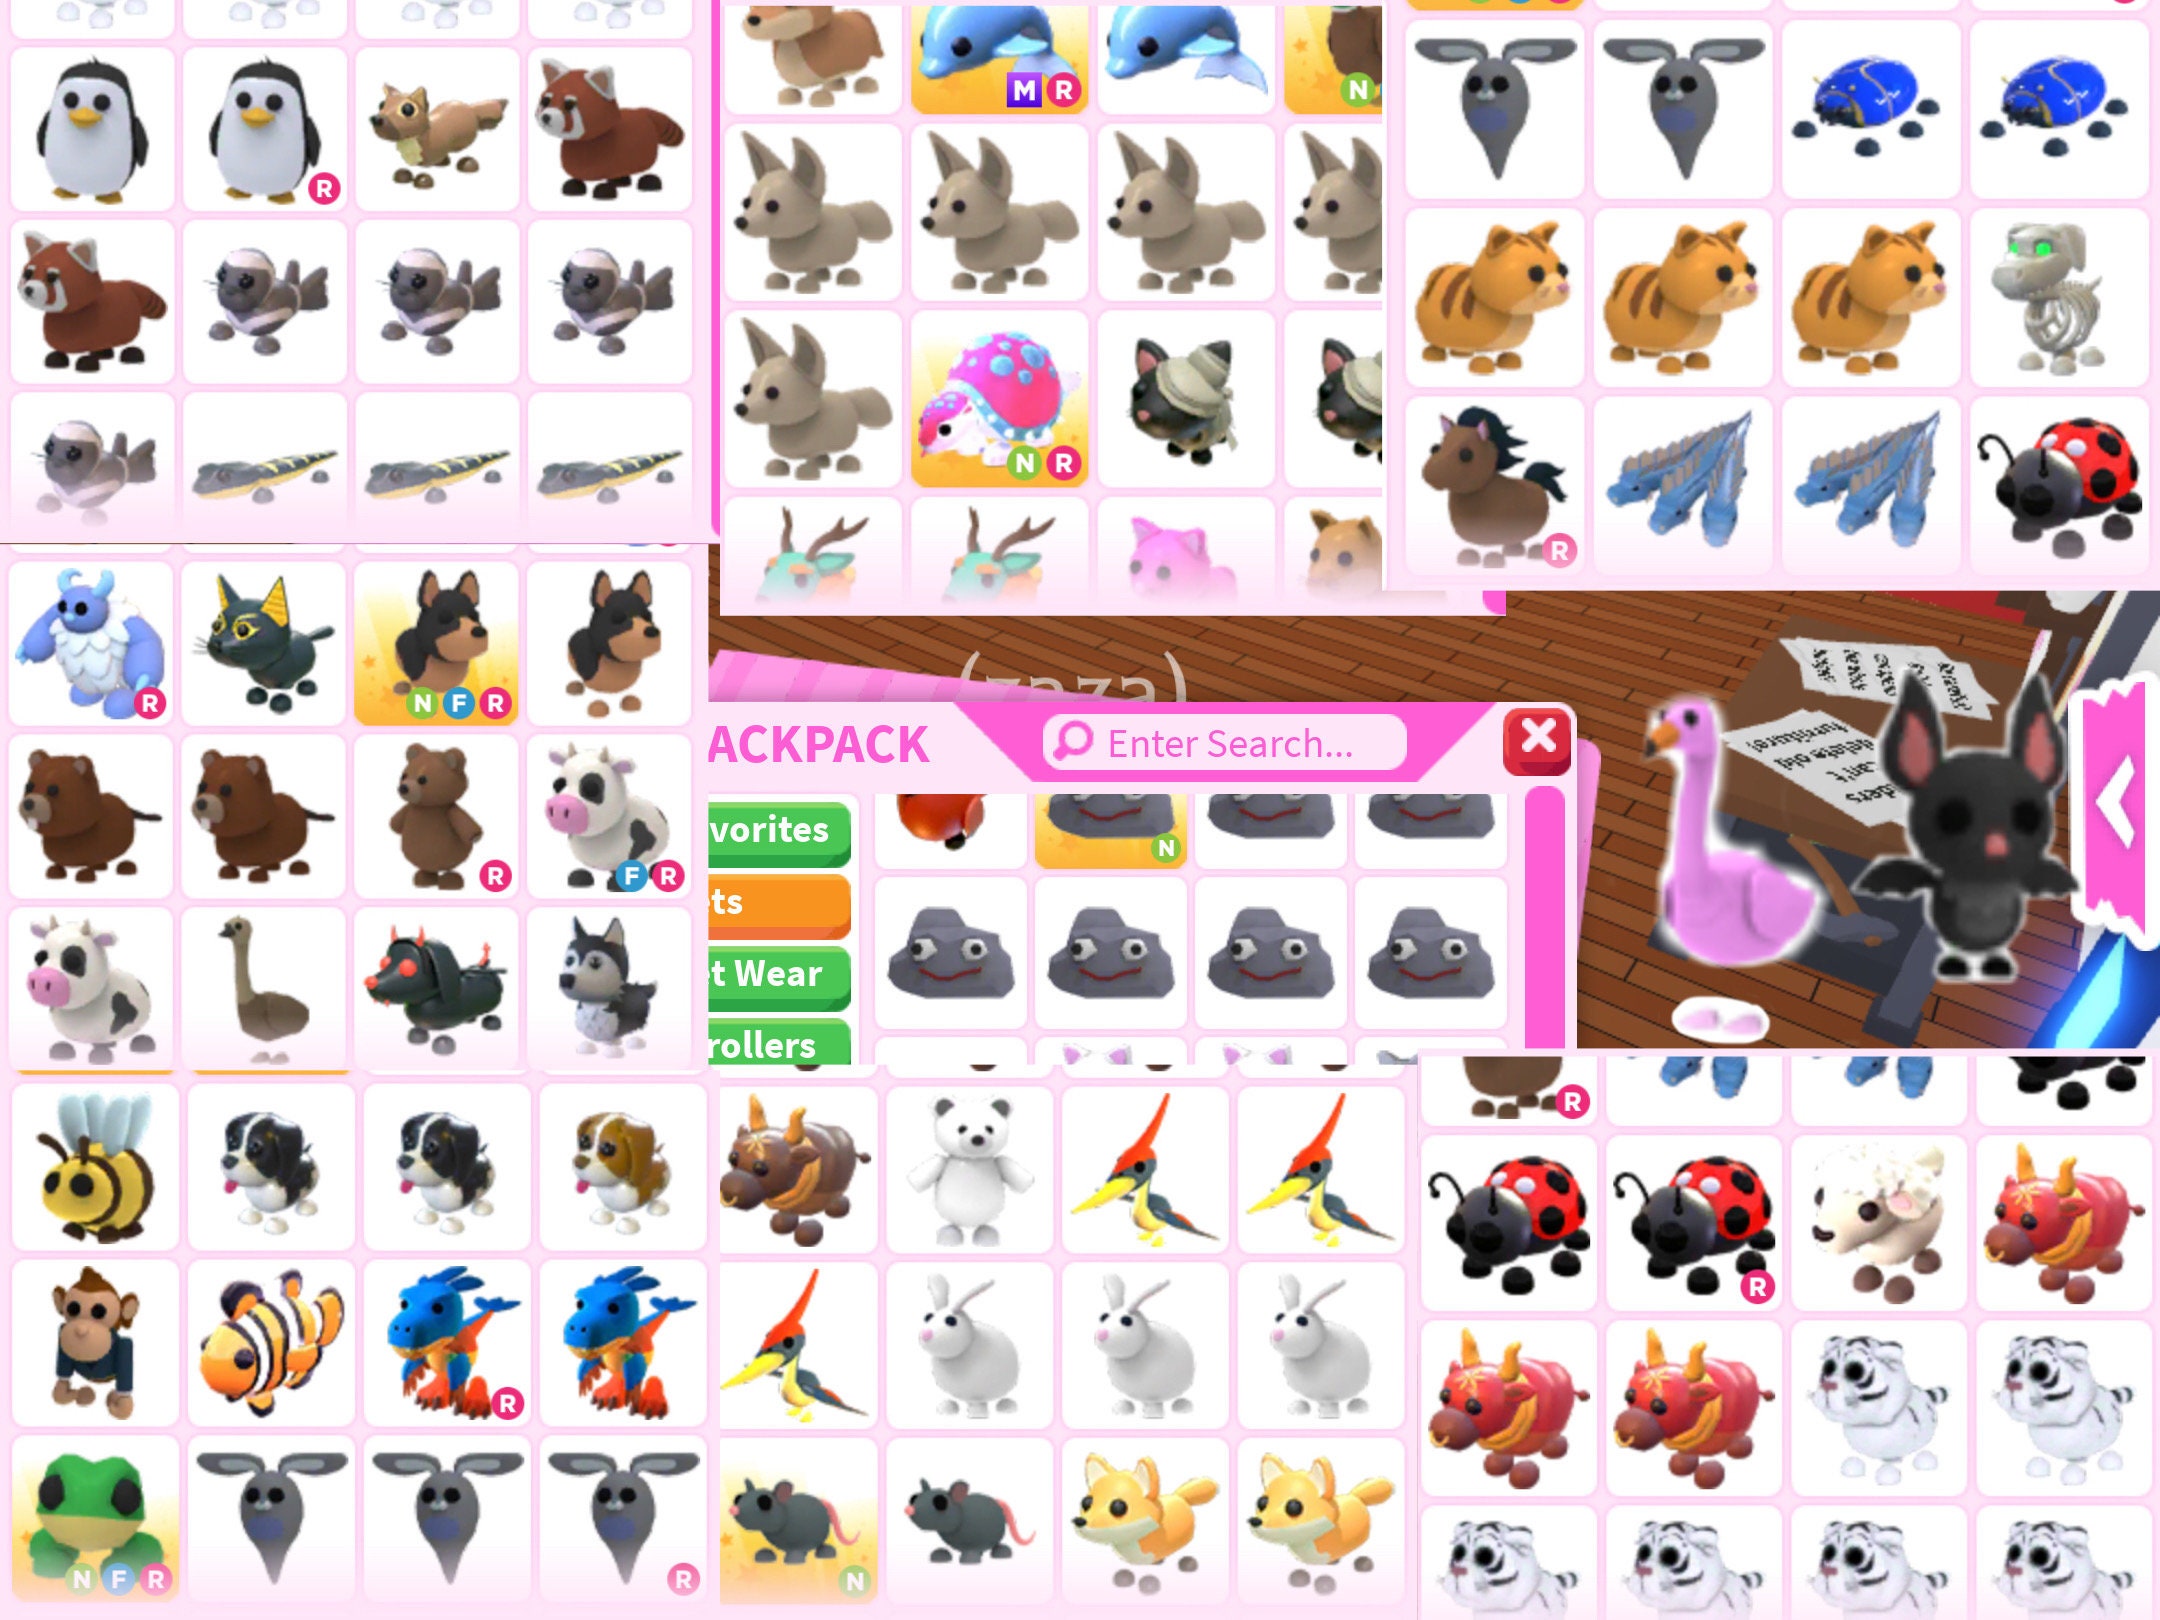 The Goose topping our Adopt Me! list #AdoptMePets #Roblox